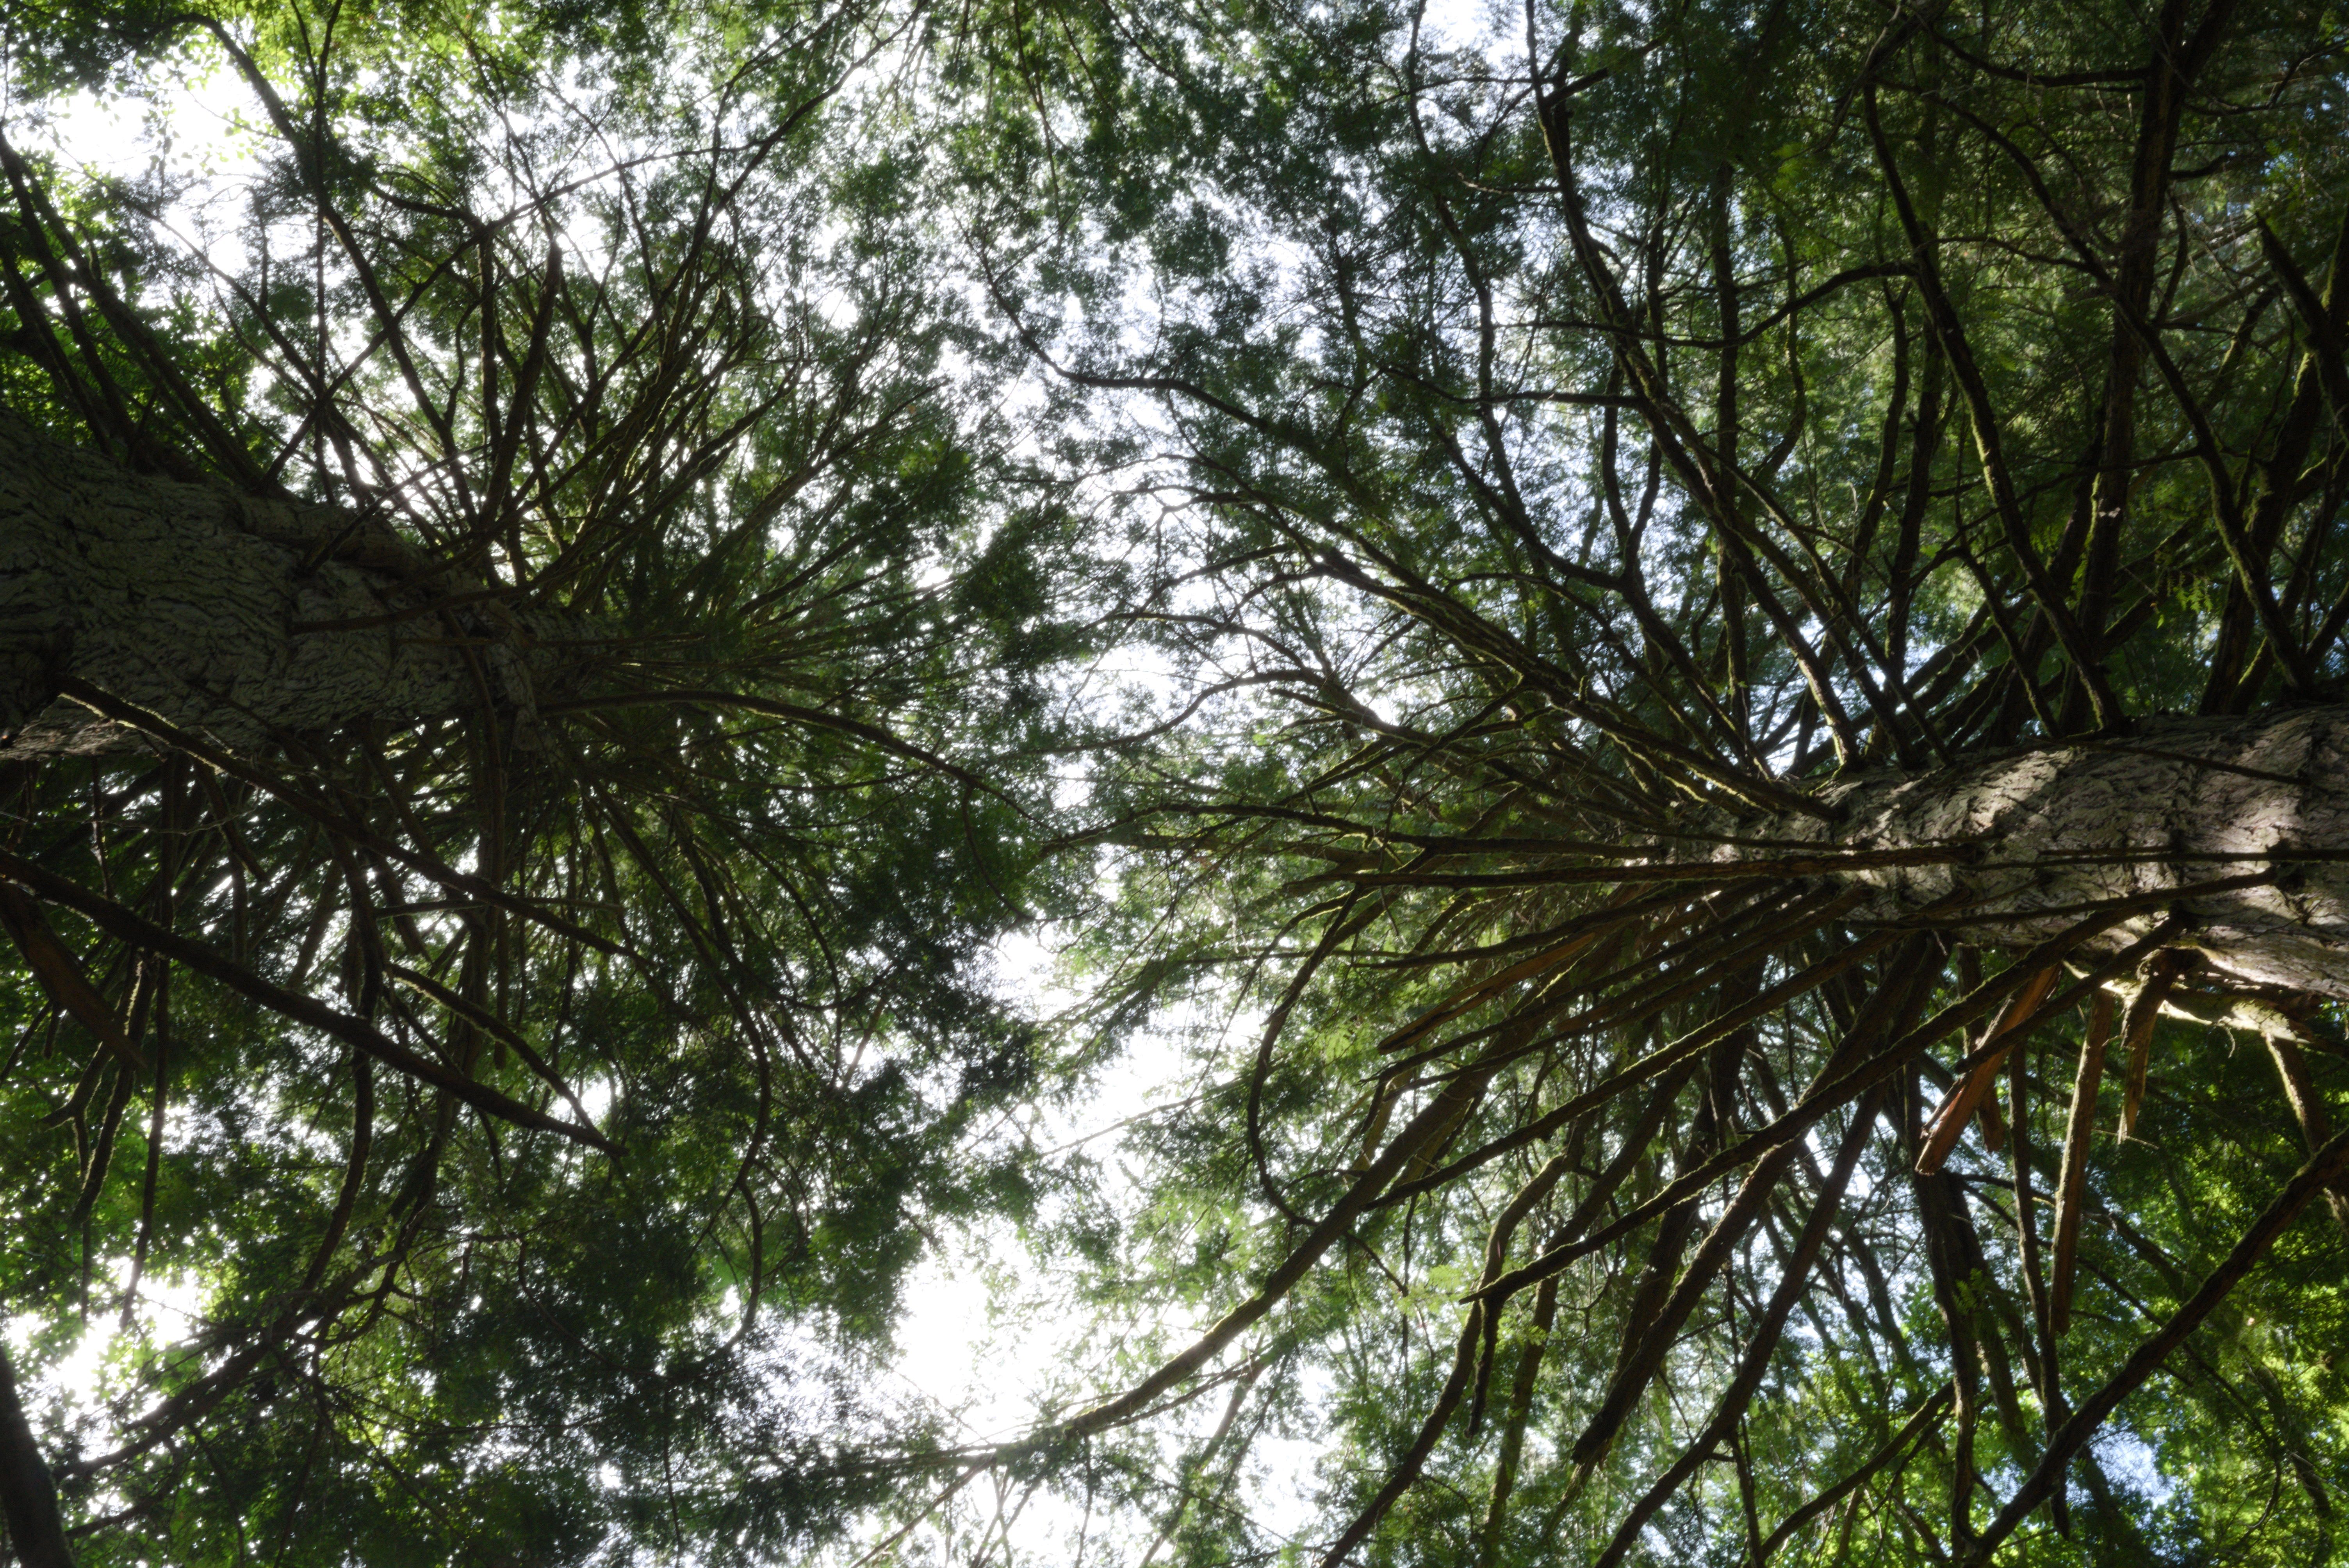 looking up through the forest canopy